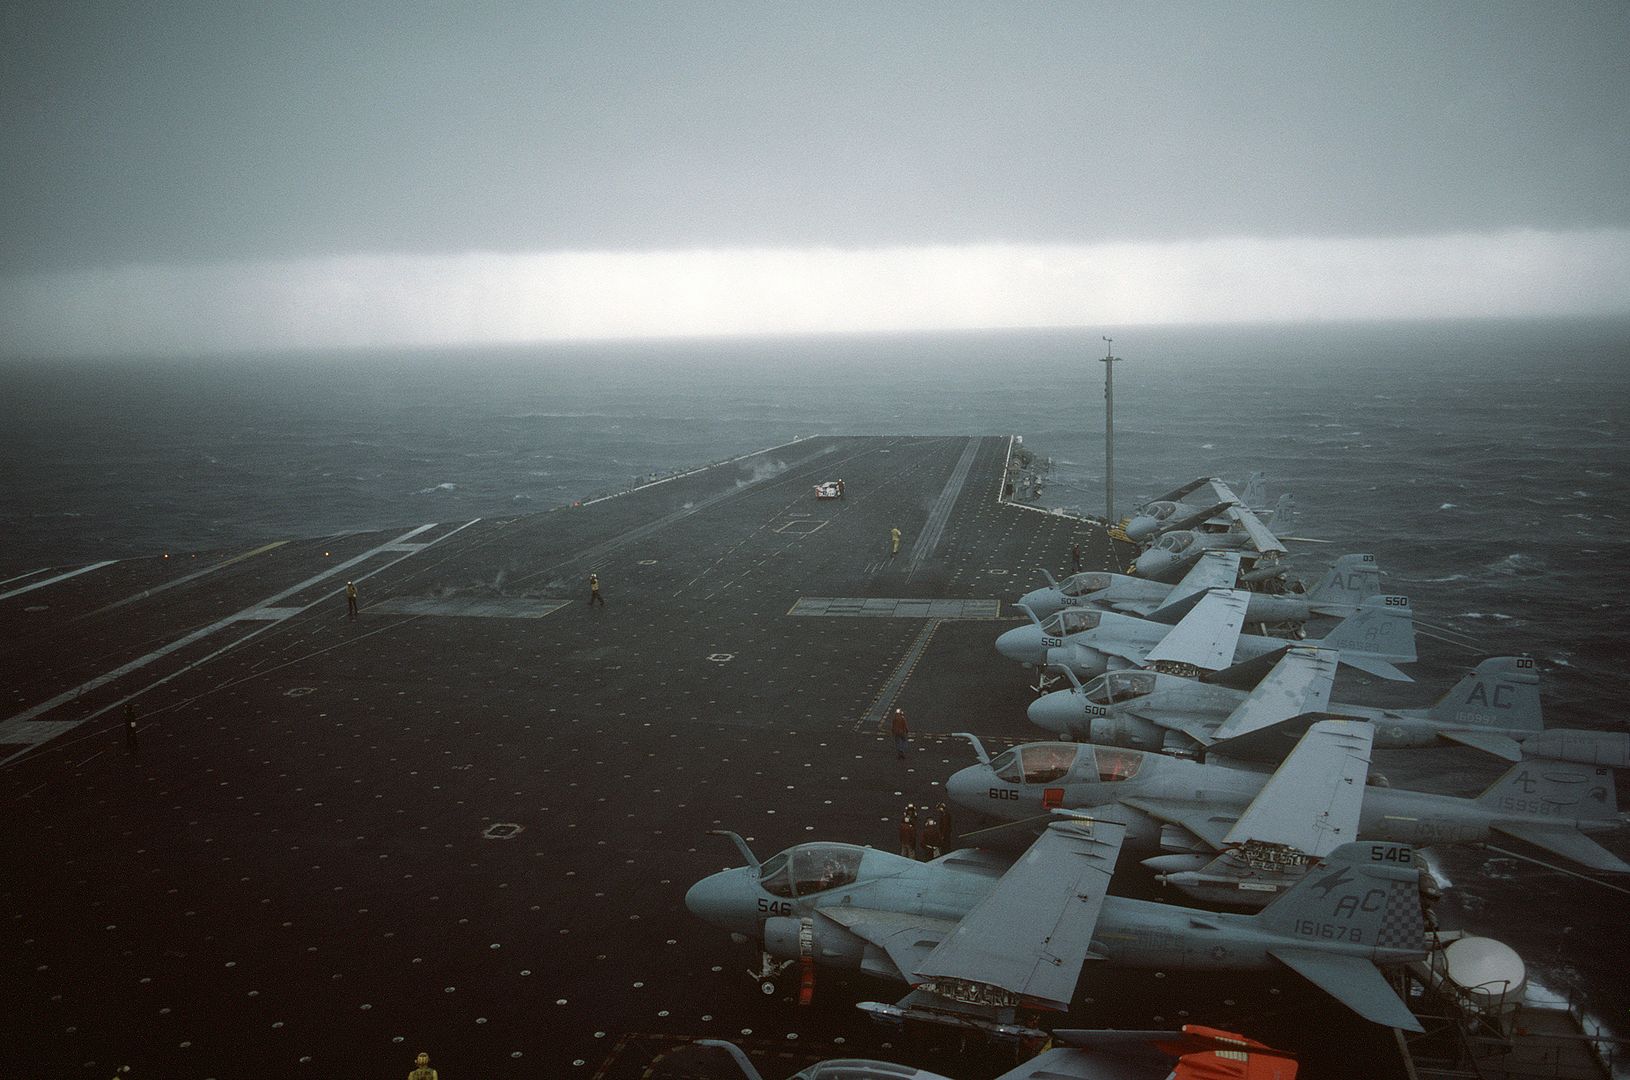  Parked On The Flight Deck Are Several A 6E Intruder Aircraft And An EA 6B Prowler Aircraft